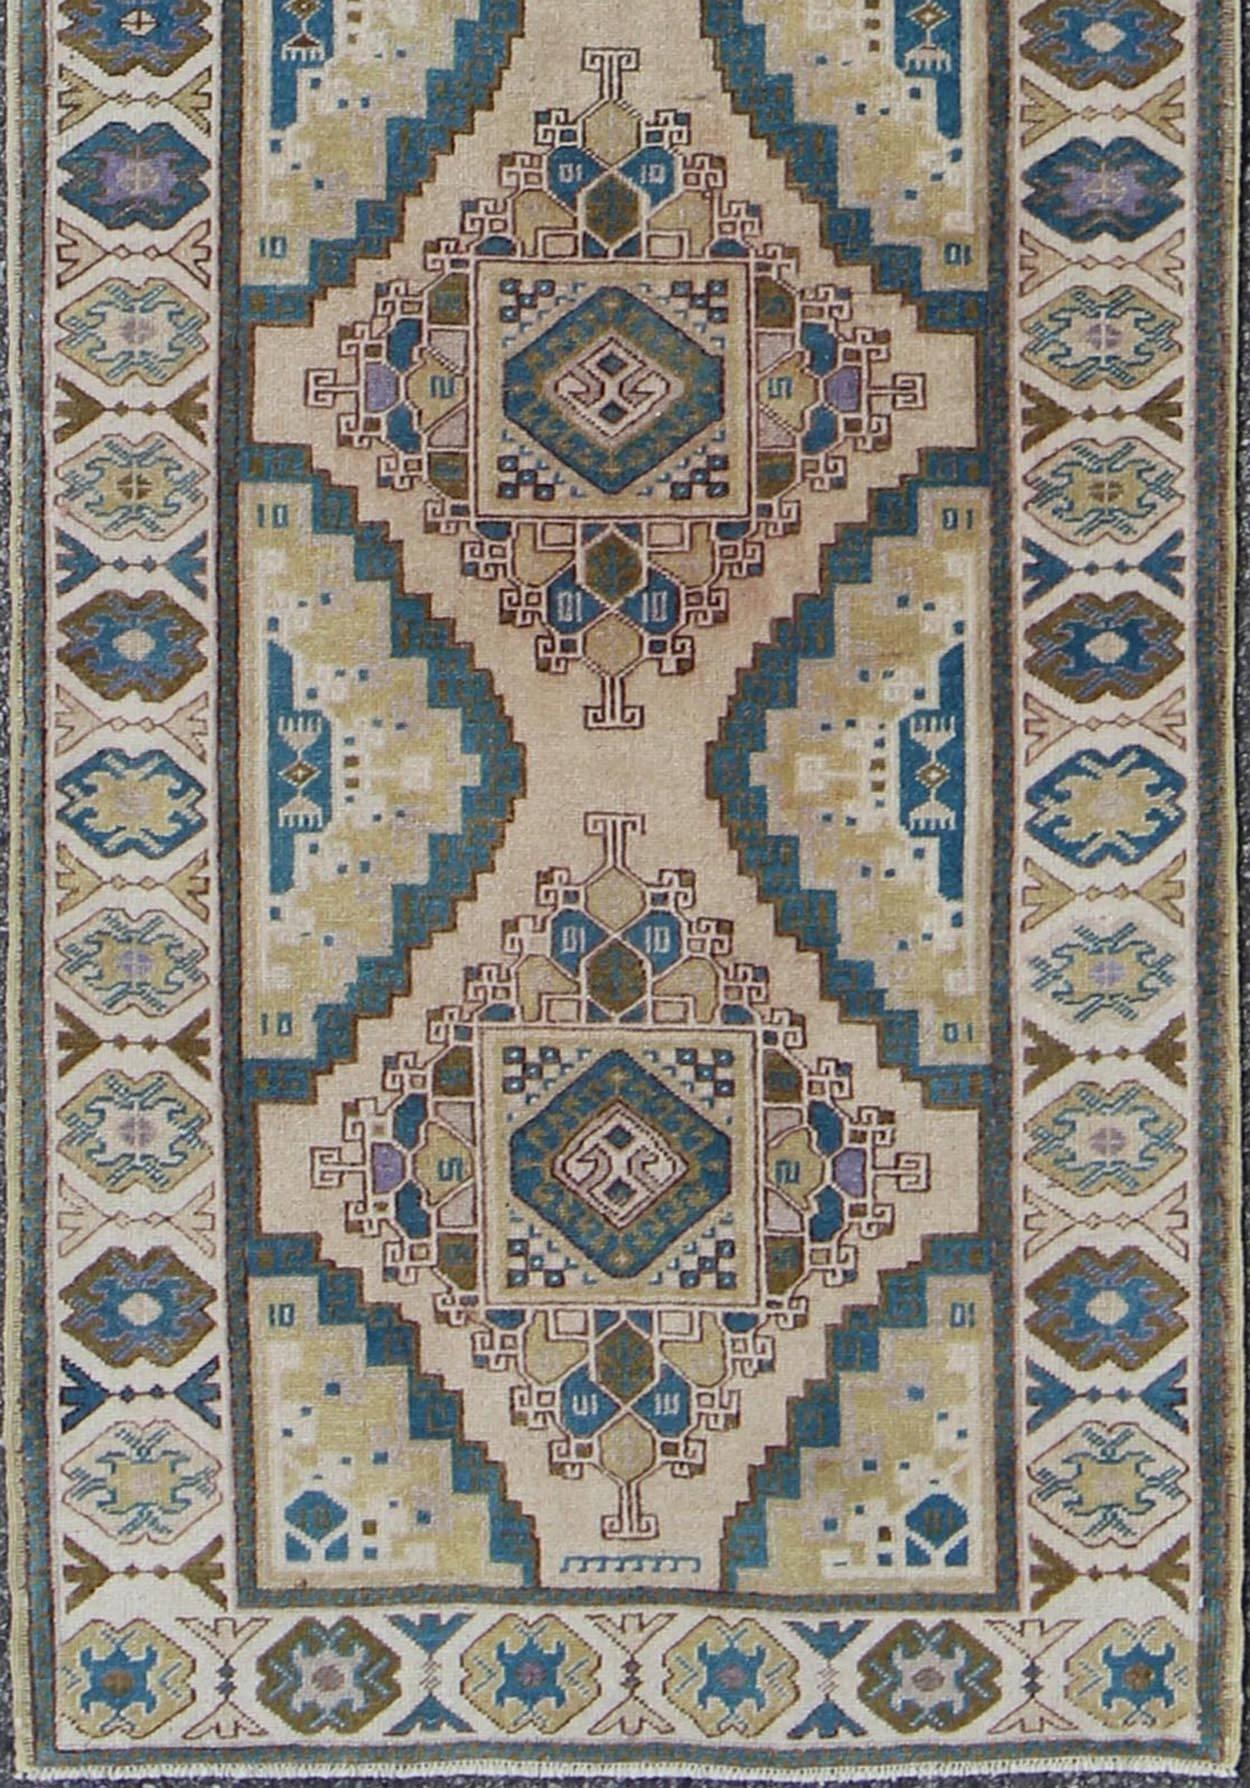 This vintage Turkish Oushak gallery runner (circa 1930) features a unique blend of colors and an intricately beautiful design. The central field is adorned with a plethora of vibrant sub-geometric shapes, which are surrounded by complementary